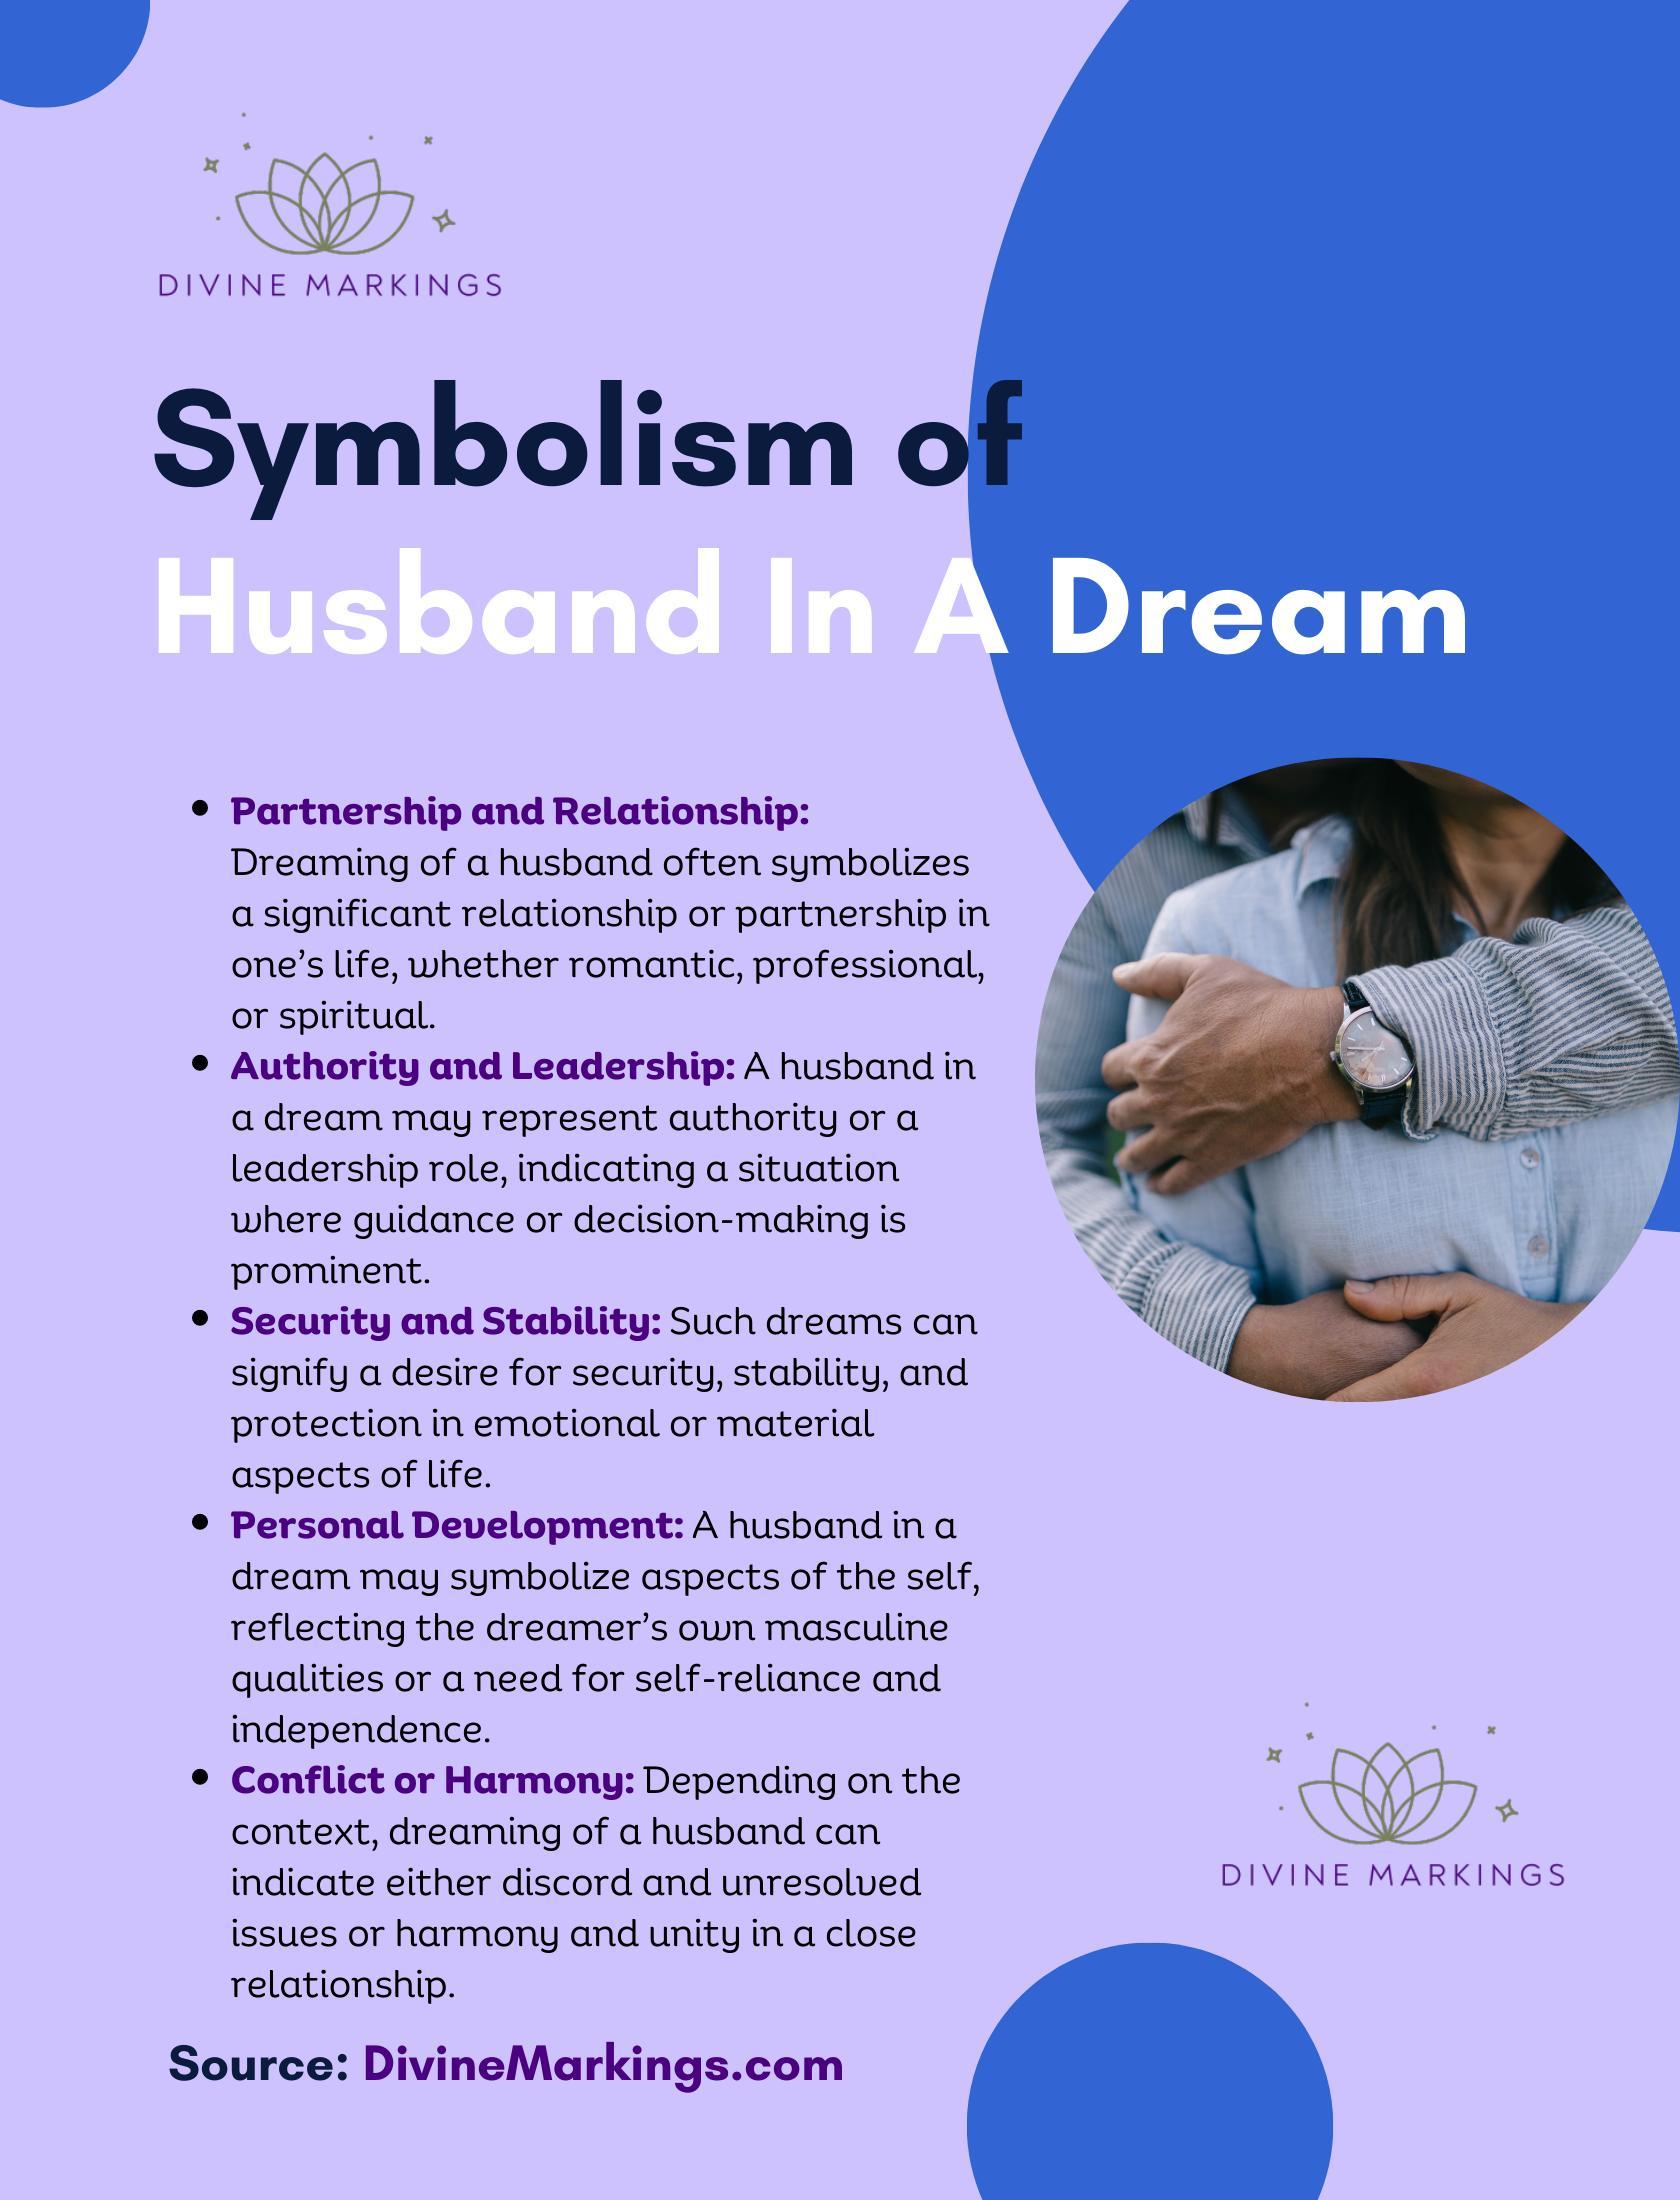 Symbolism of Husband In A Dream - Infographic